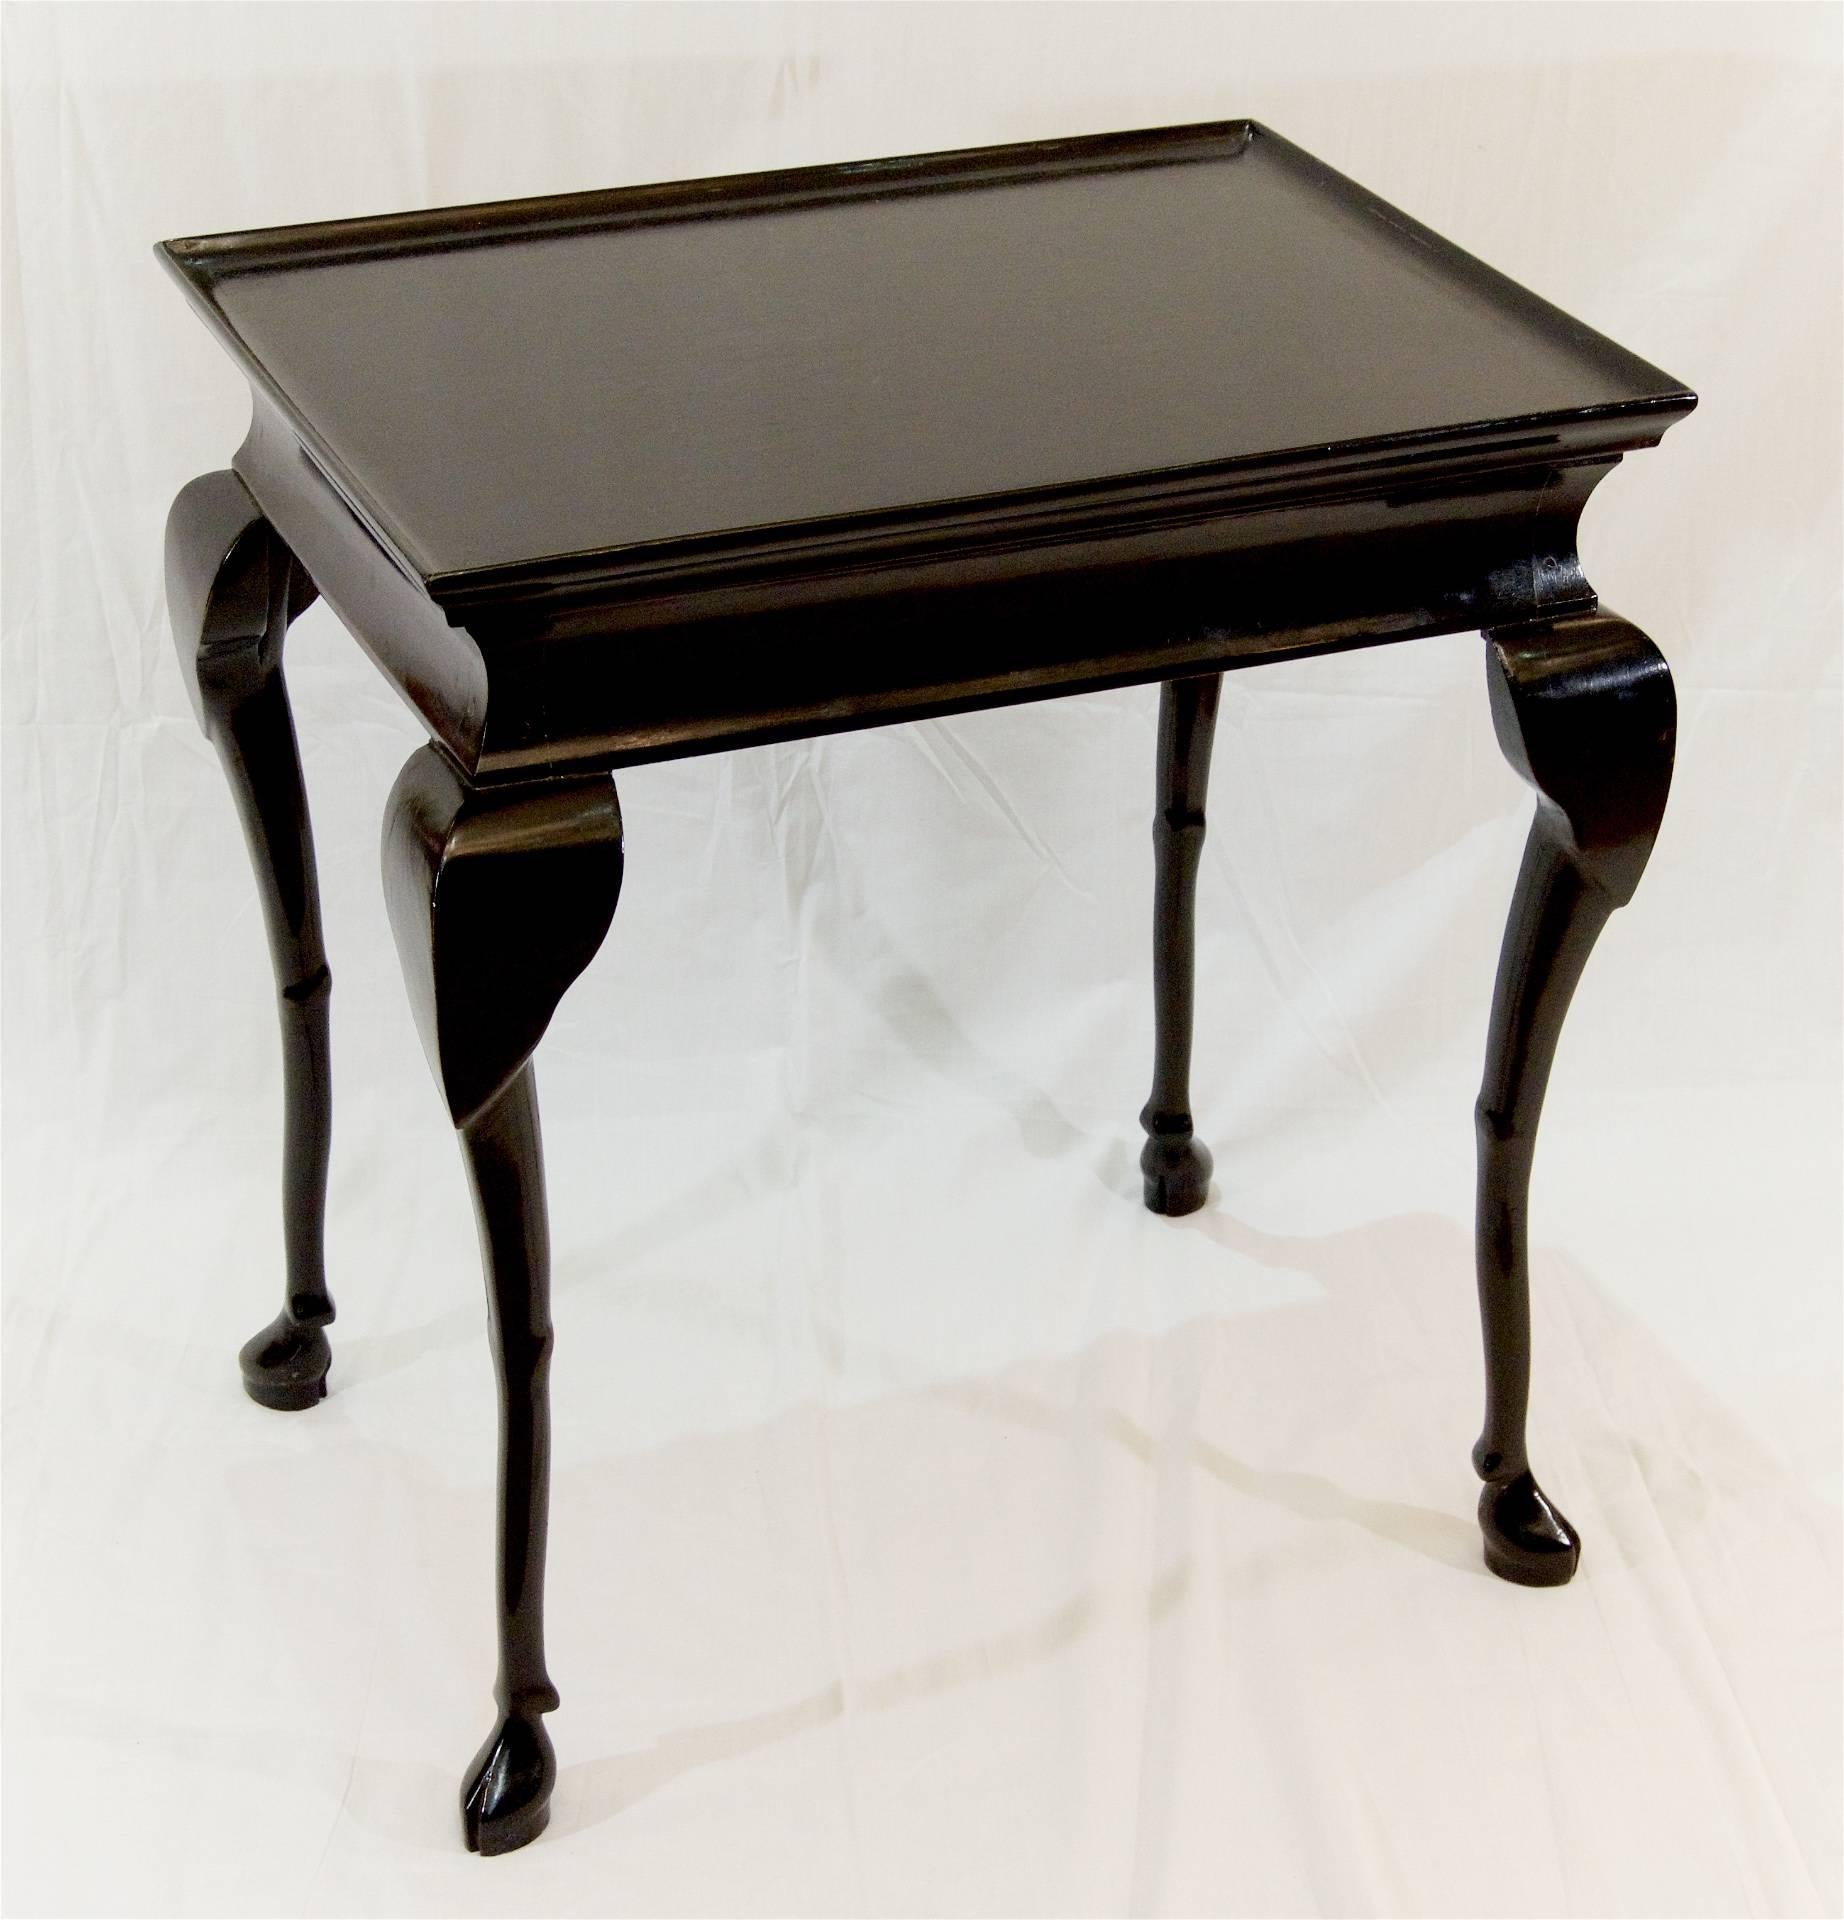 A well-sized ebonized table with elegant lines and hoofed feet.